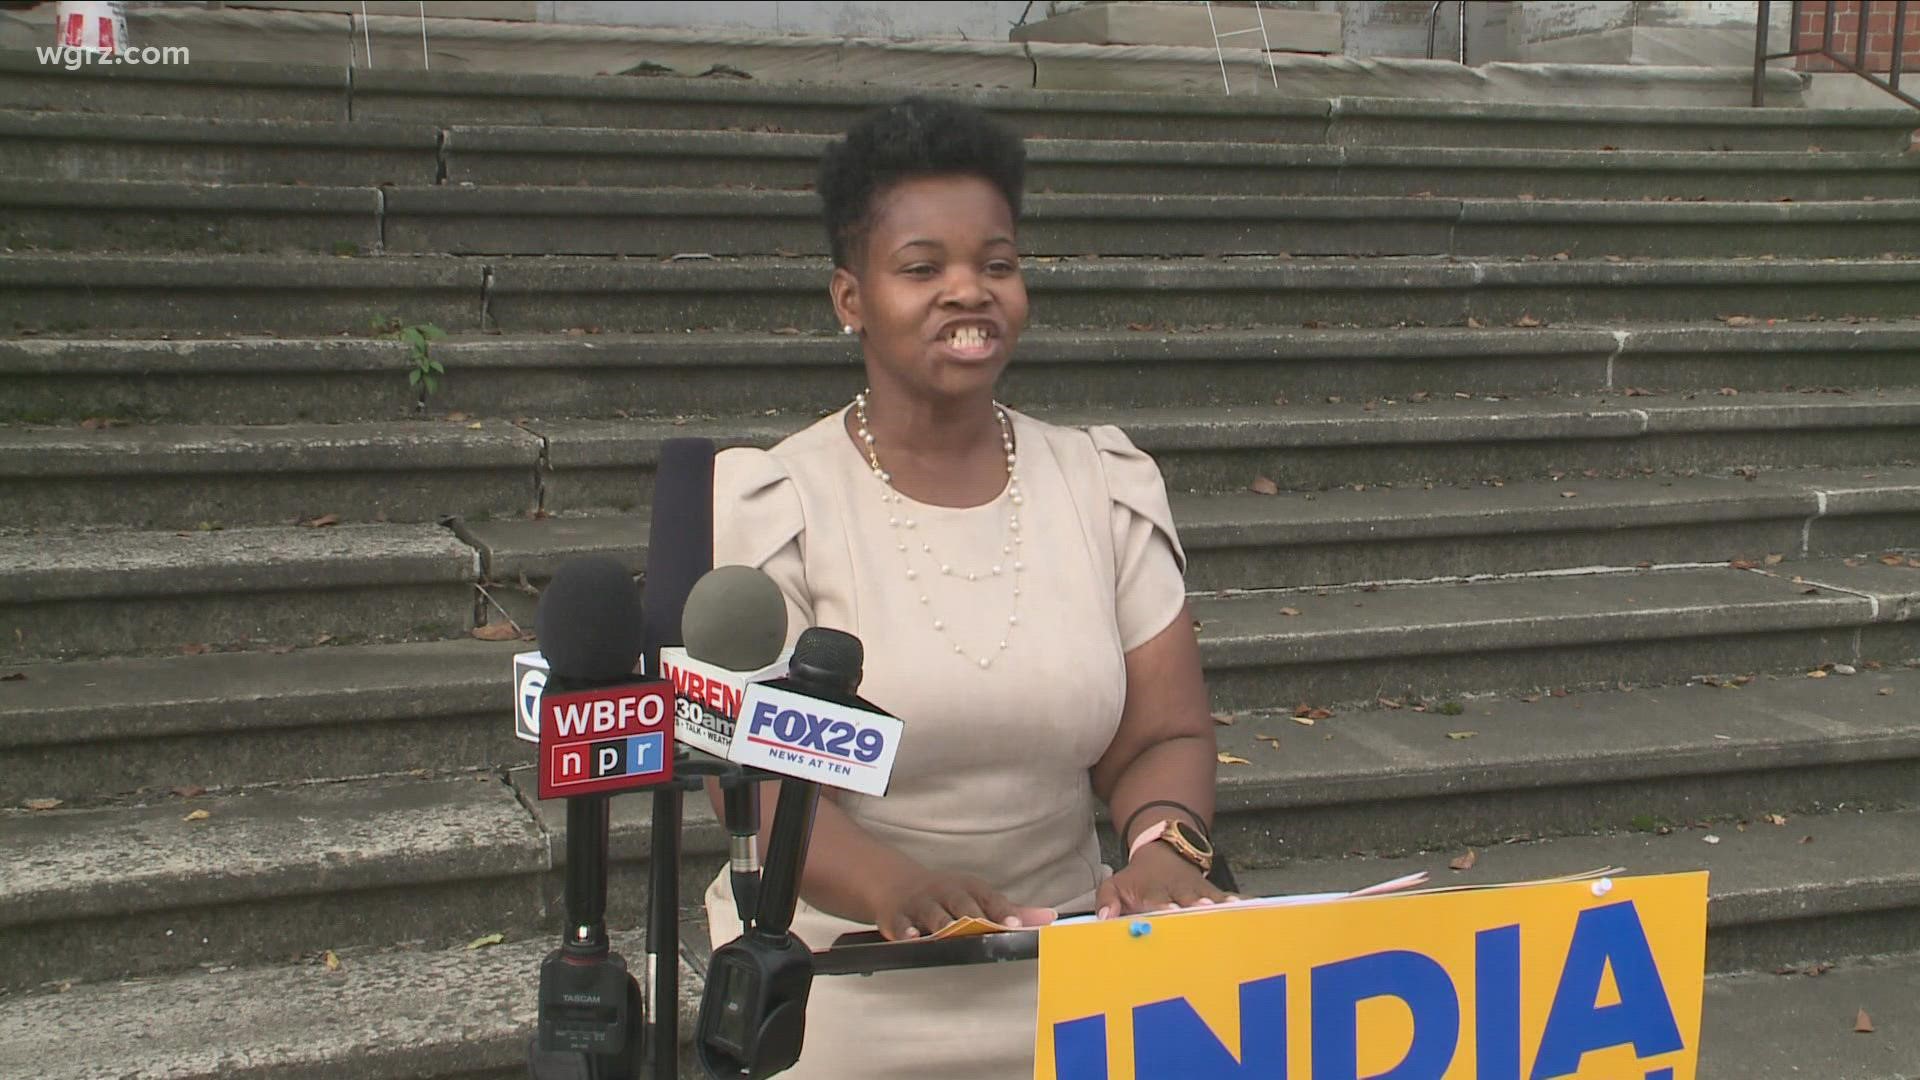 India Walton spoke more today about having her car impounded because she had several unpaid parking tickets and failed to have the inspection done.